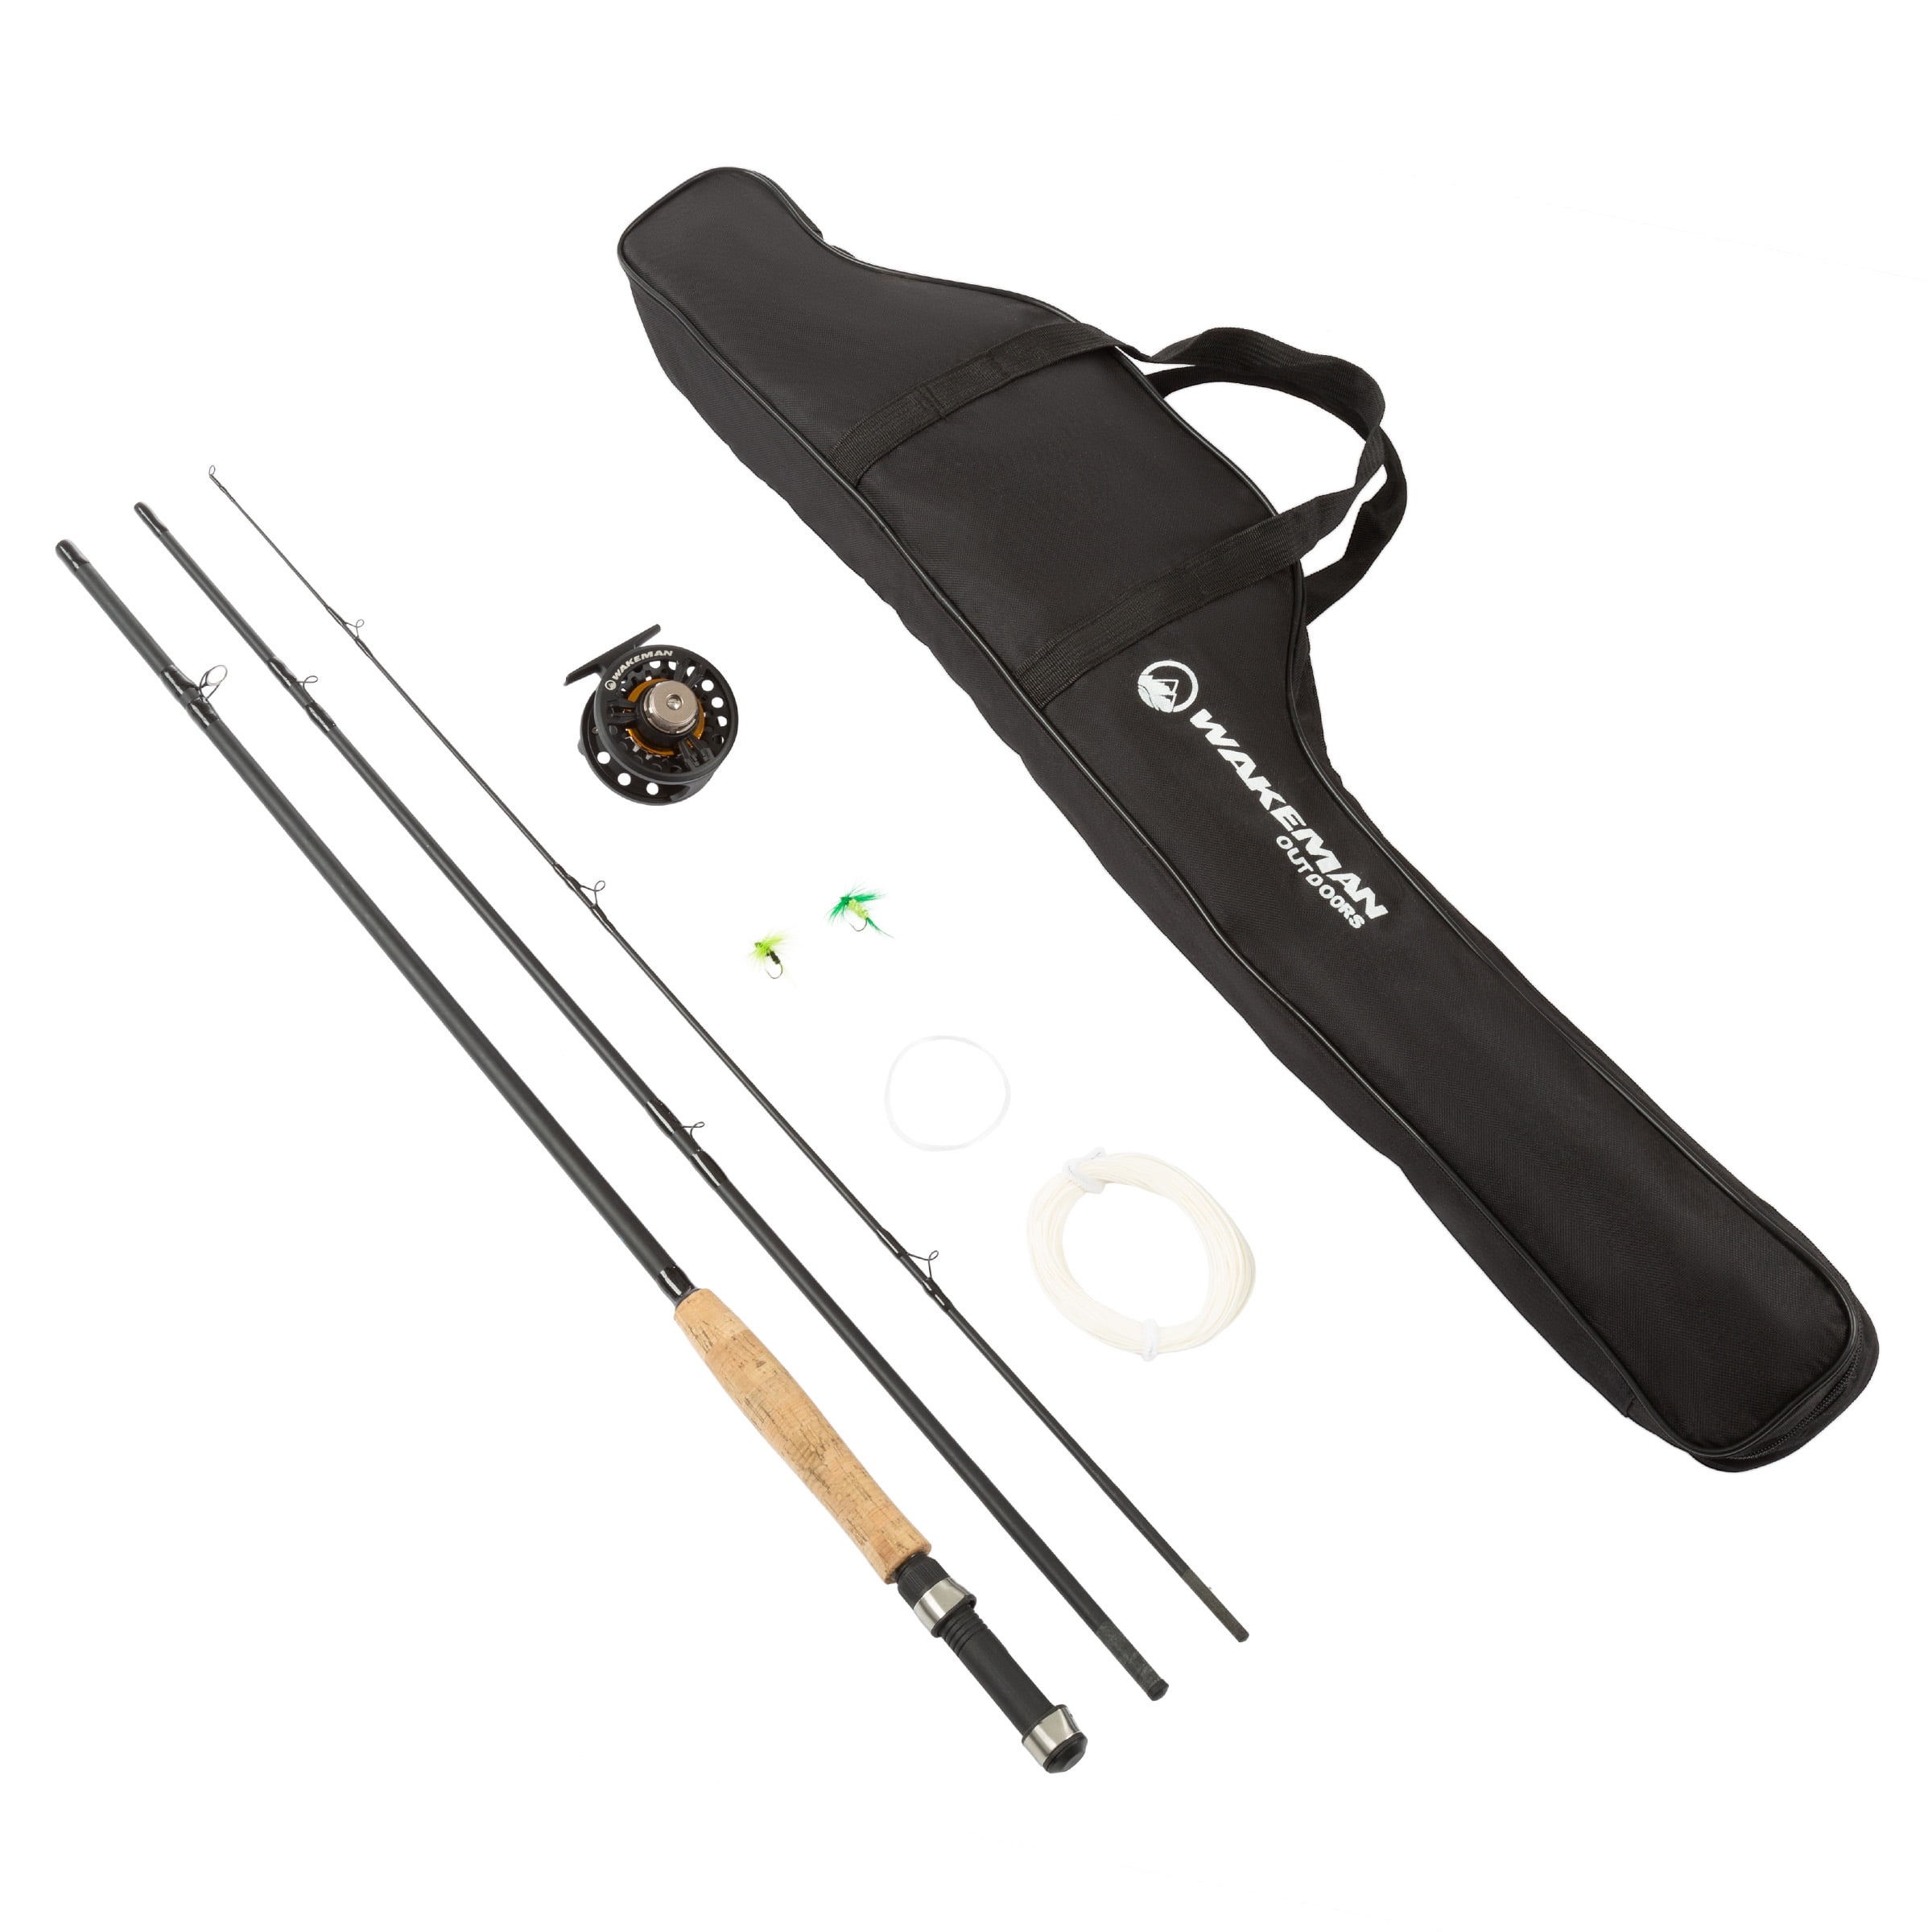 Wakeman 3-Piece Fly Fishing Rod and Reel Combo Starter Kit with